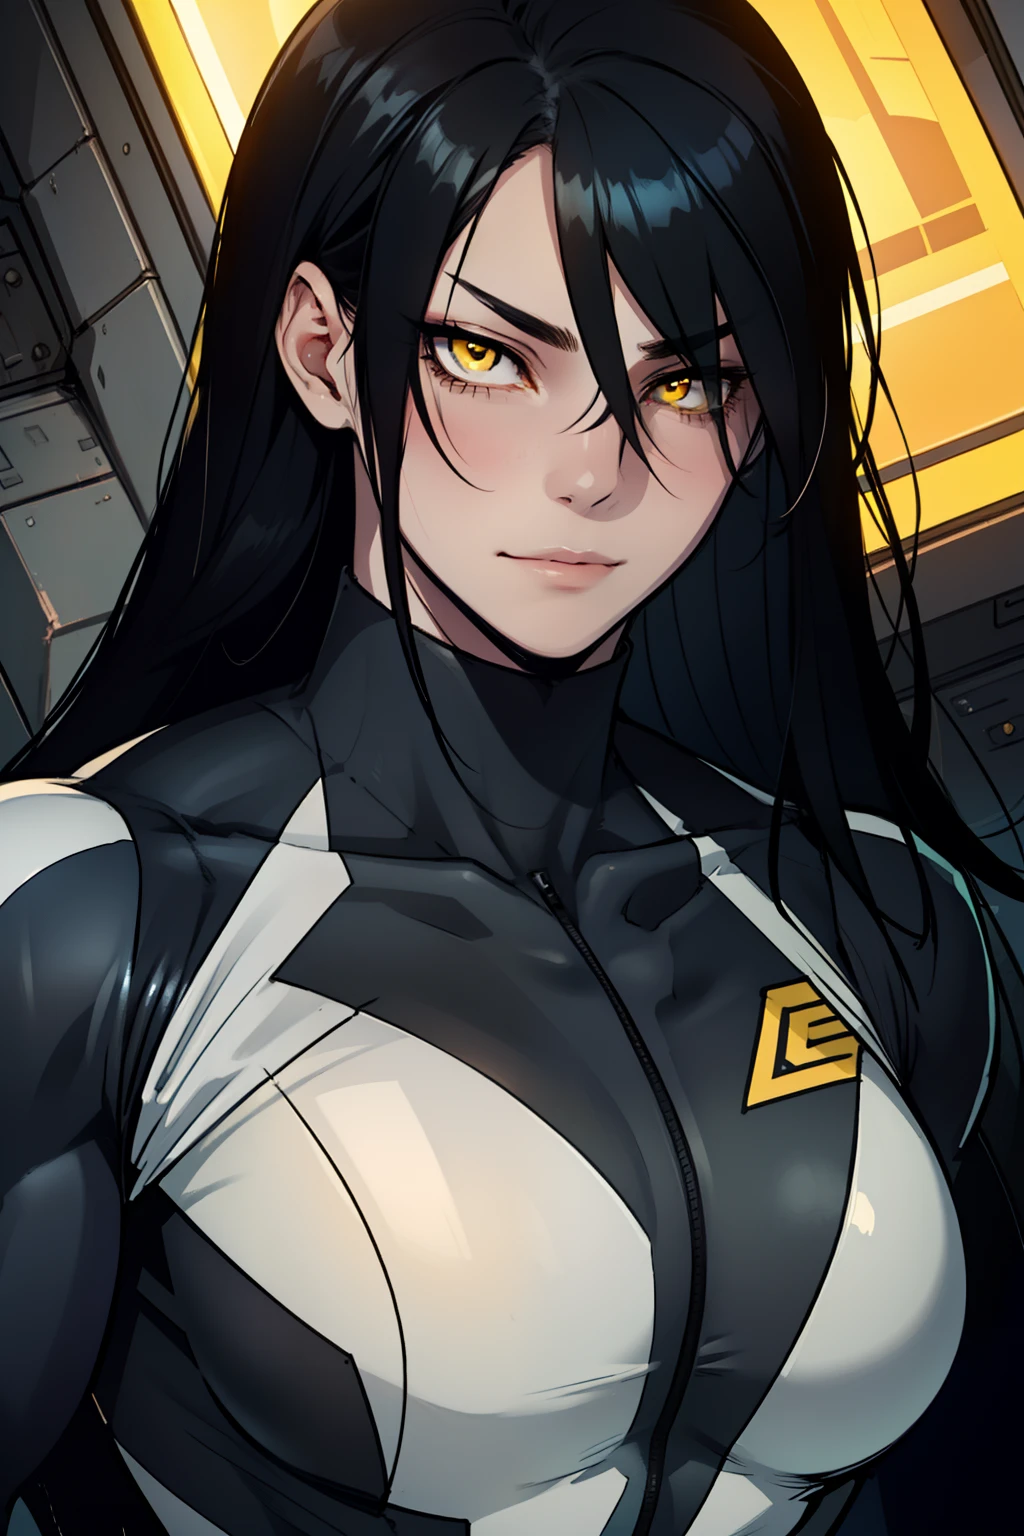 1 girl, black hair, yellow eyes, very long hair, pale skin, ((((extremely muscular)))), large breasts, (confident expression), pilot suit, close up